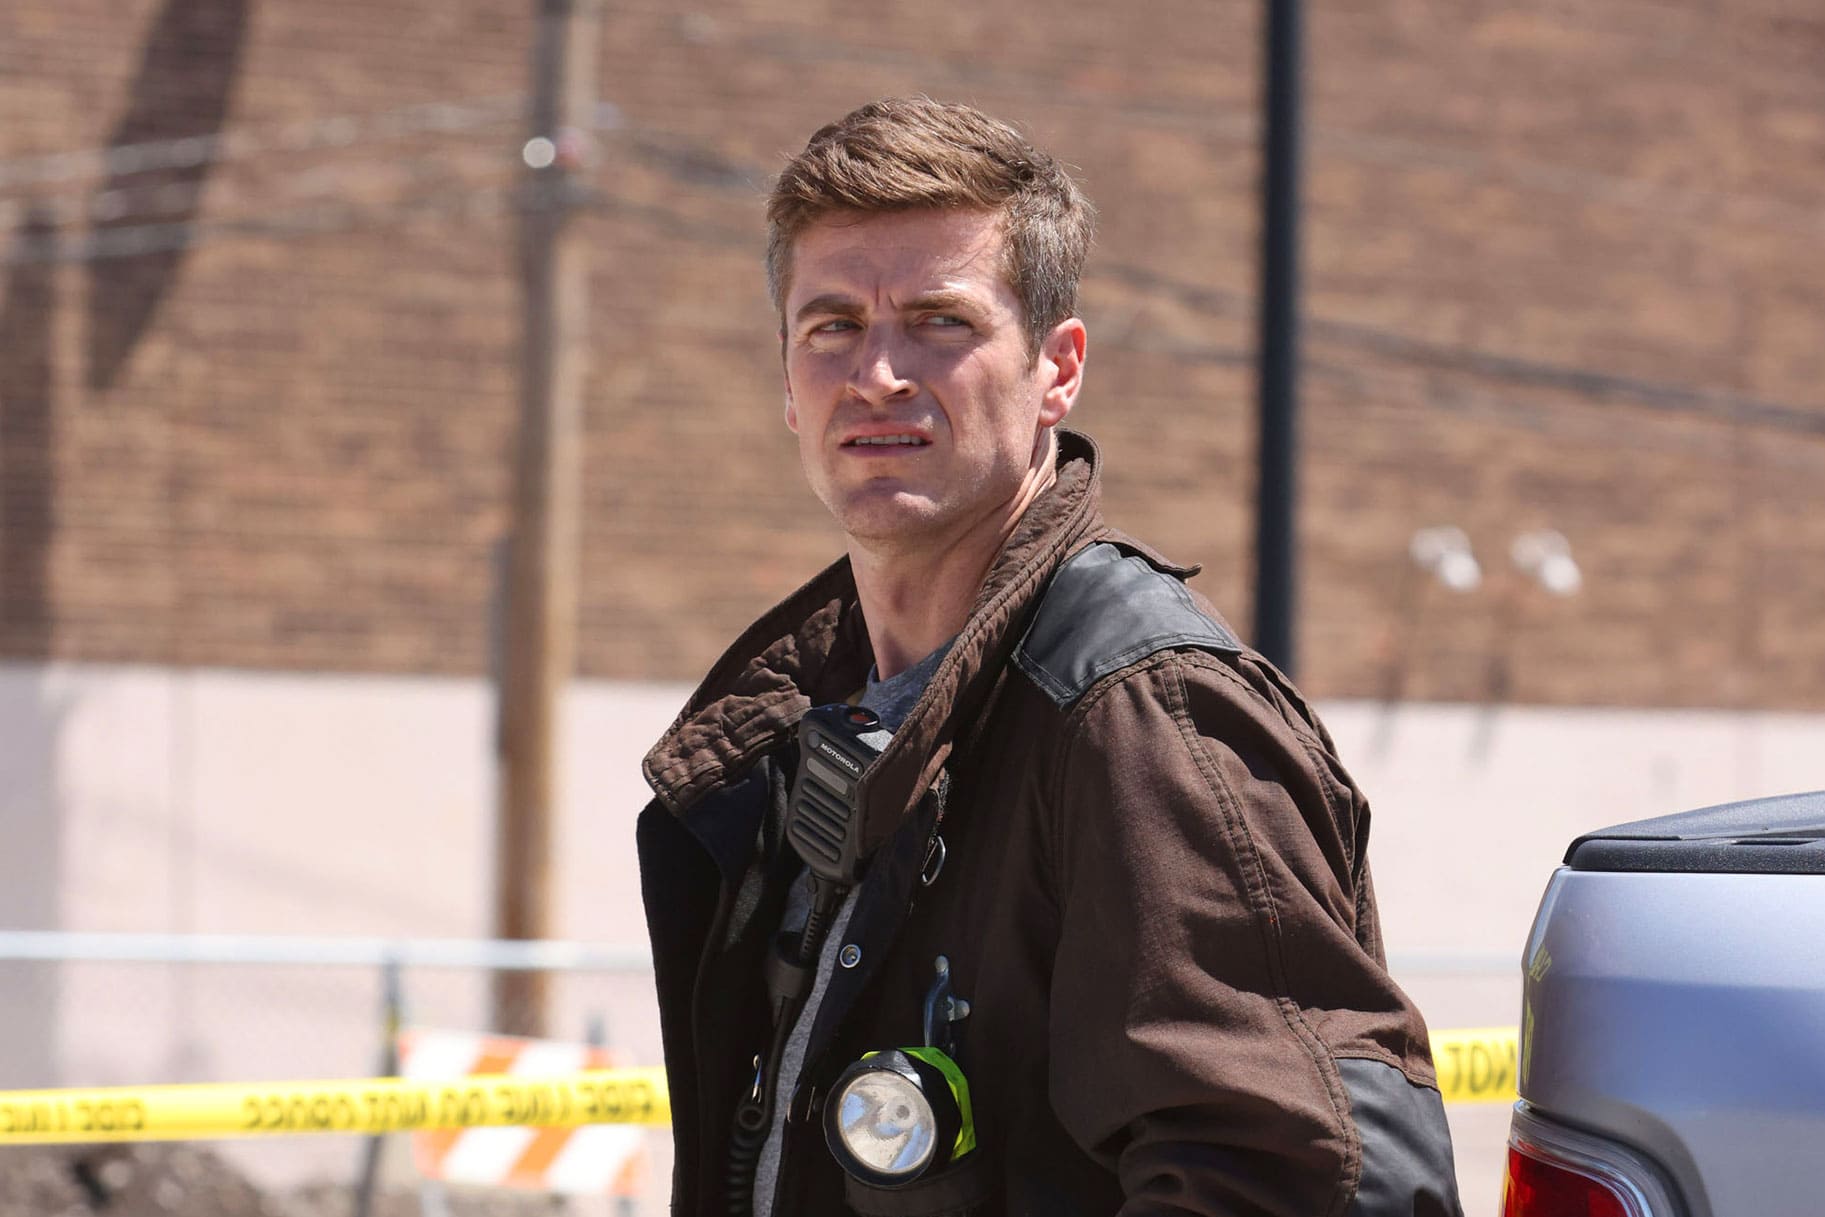 Chicago Fire Season 12 Finale Sees Major Exits and New Beginnings for Firehouse 51